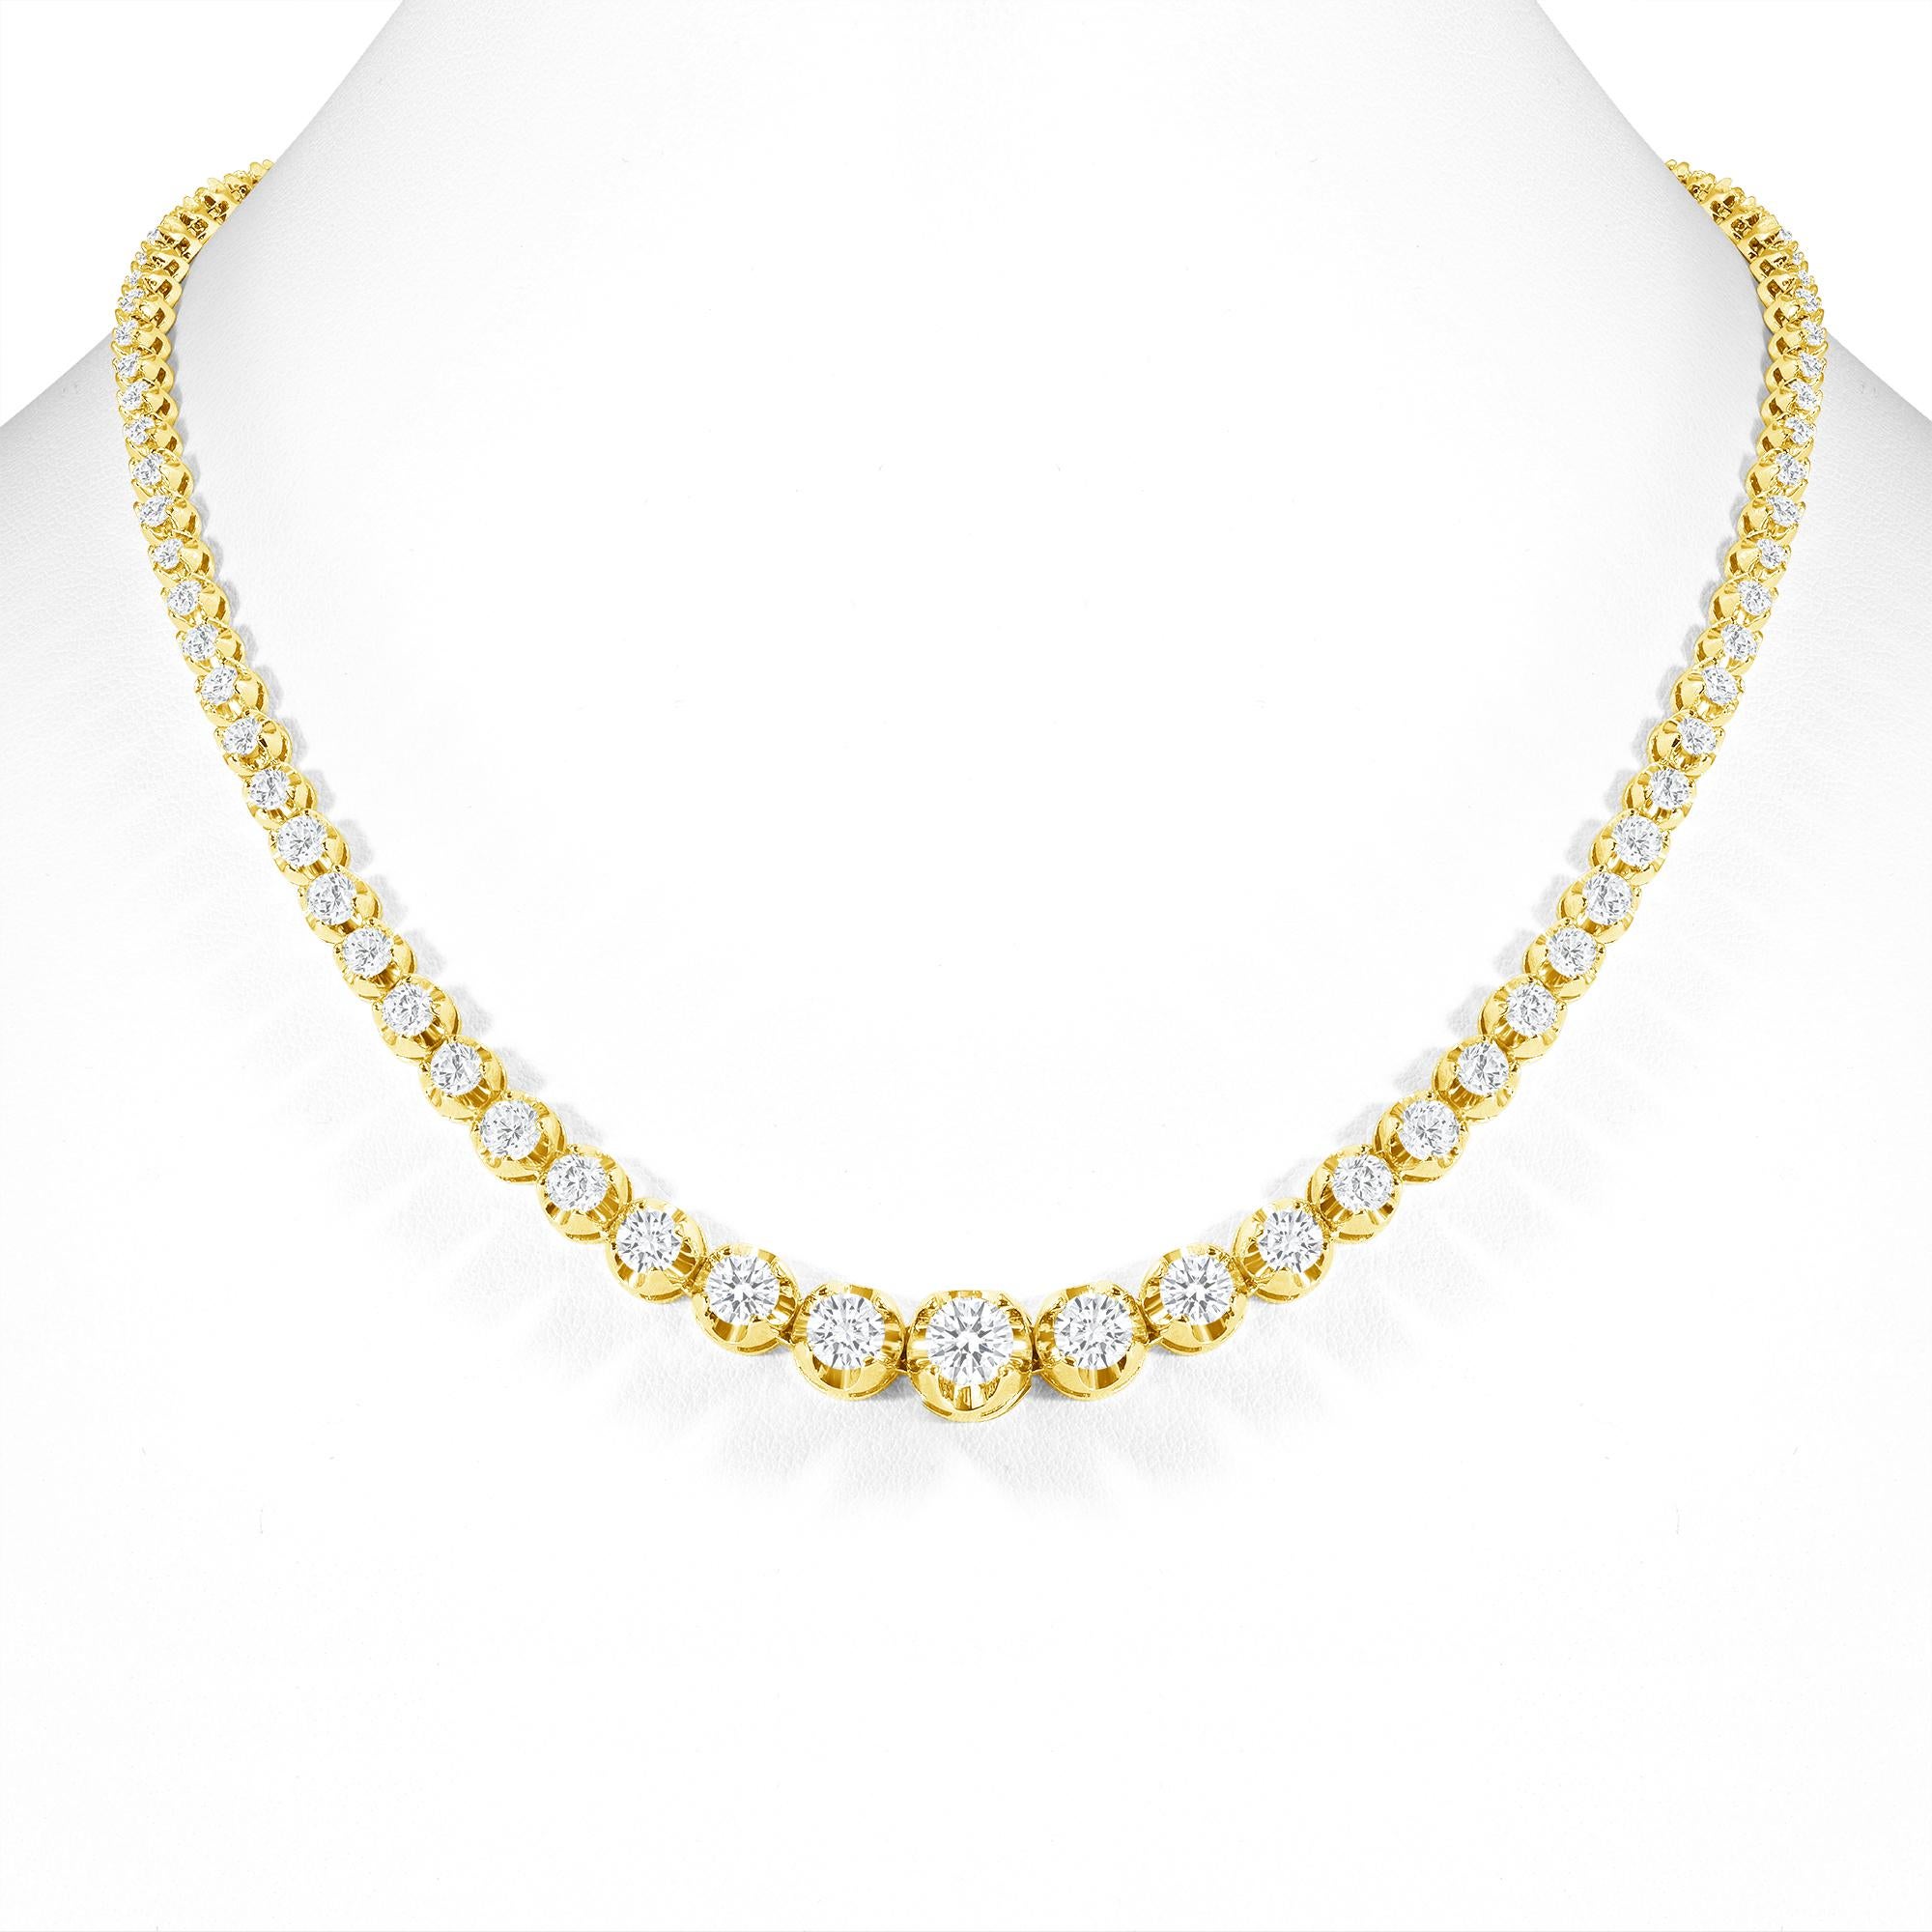 This finely made graduated necklace with beautiful round diamonds sits elegantly on any neck. 

Metal: 14k Gold
Diamond Cut: Round
Total Diamond Approx. Carats:  5ct
Diamond Clarity: VS
Diamond Color: F-G
Size: 18 inches
Color: Yellow Gold
Included